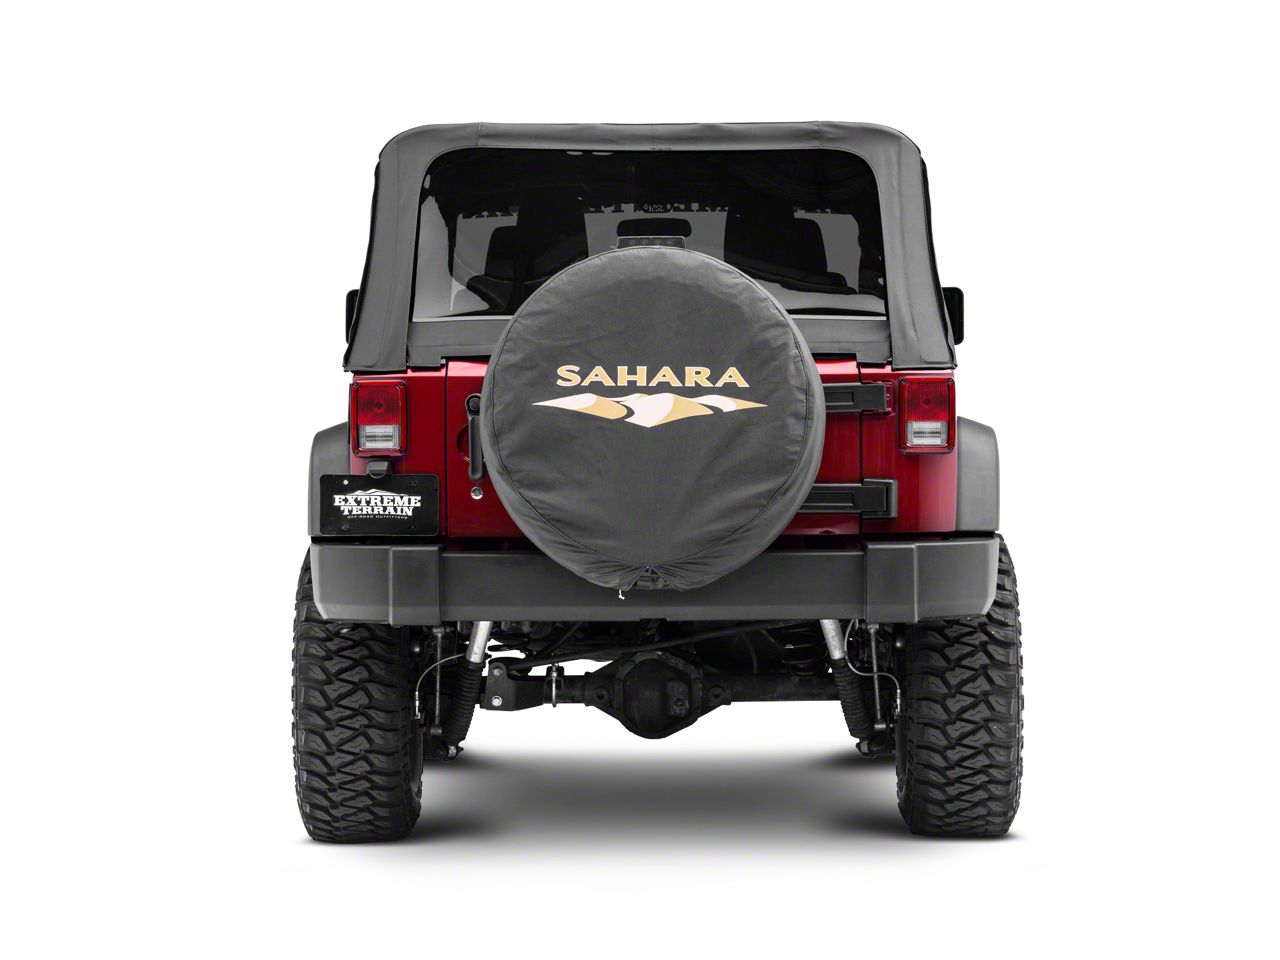 RED ROCK Outline Logo Spare Tire Cover; 29-Inch Tire Cover Compatible with 66-18 Jeep CJ5, CJ7, Wrangler YJ, TJ ＆ JK - 1